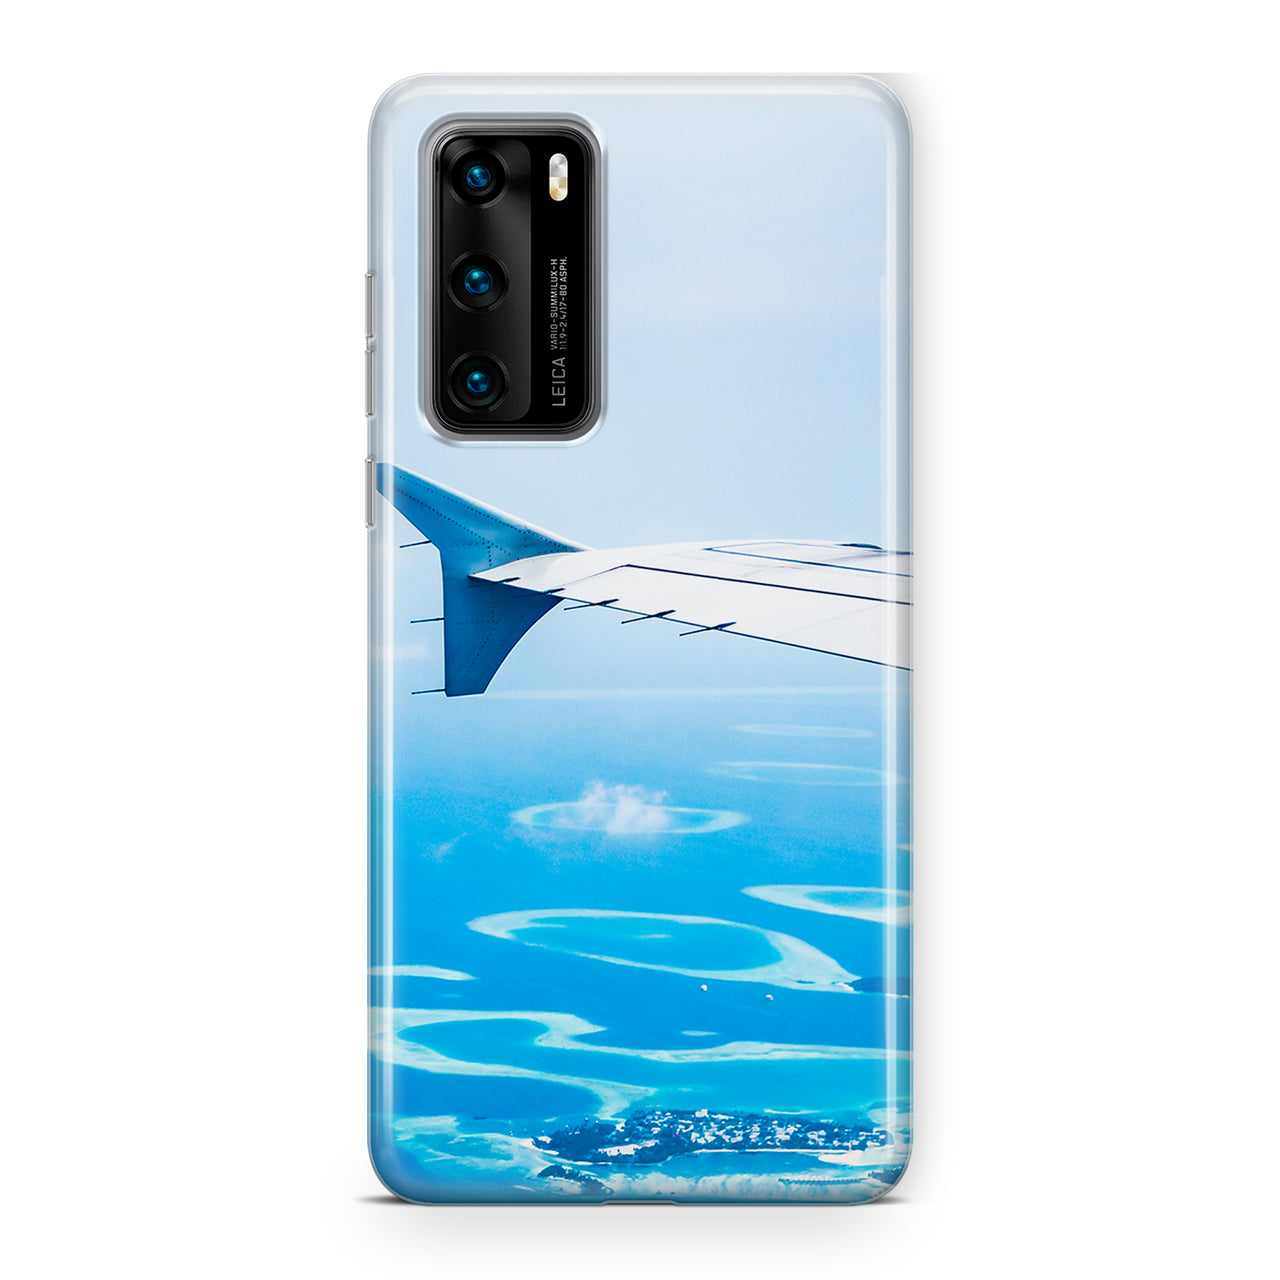 Outstanding View Through Airplane Wing Designed Huawei Cases